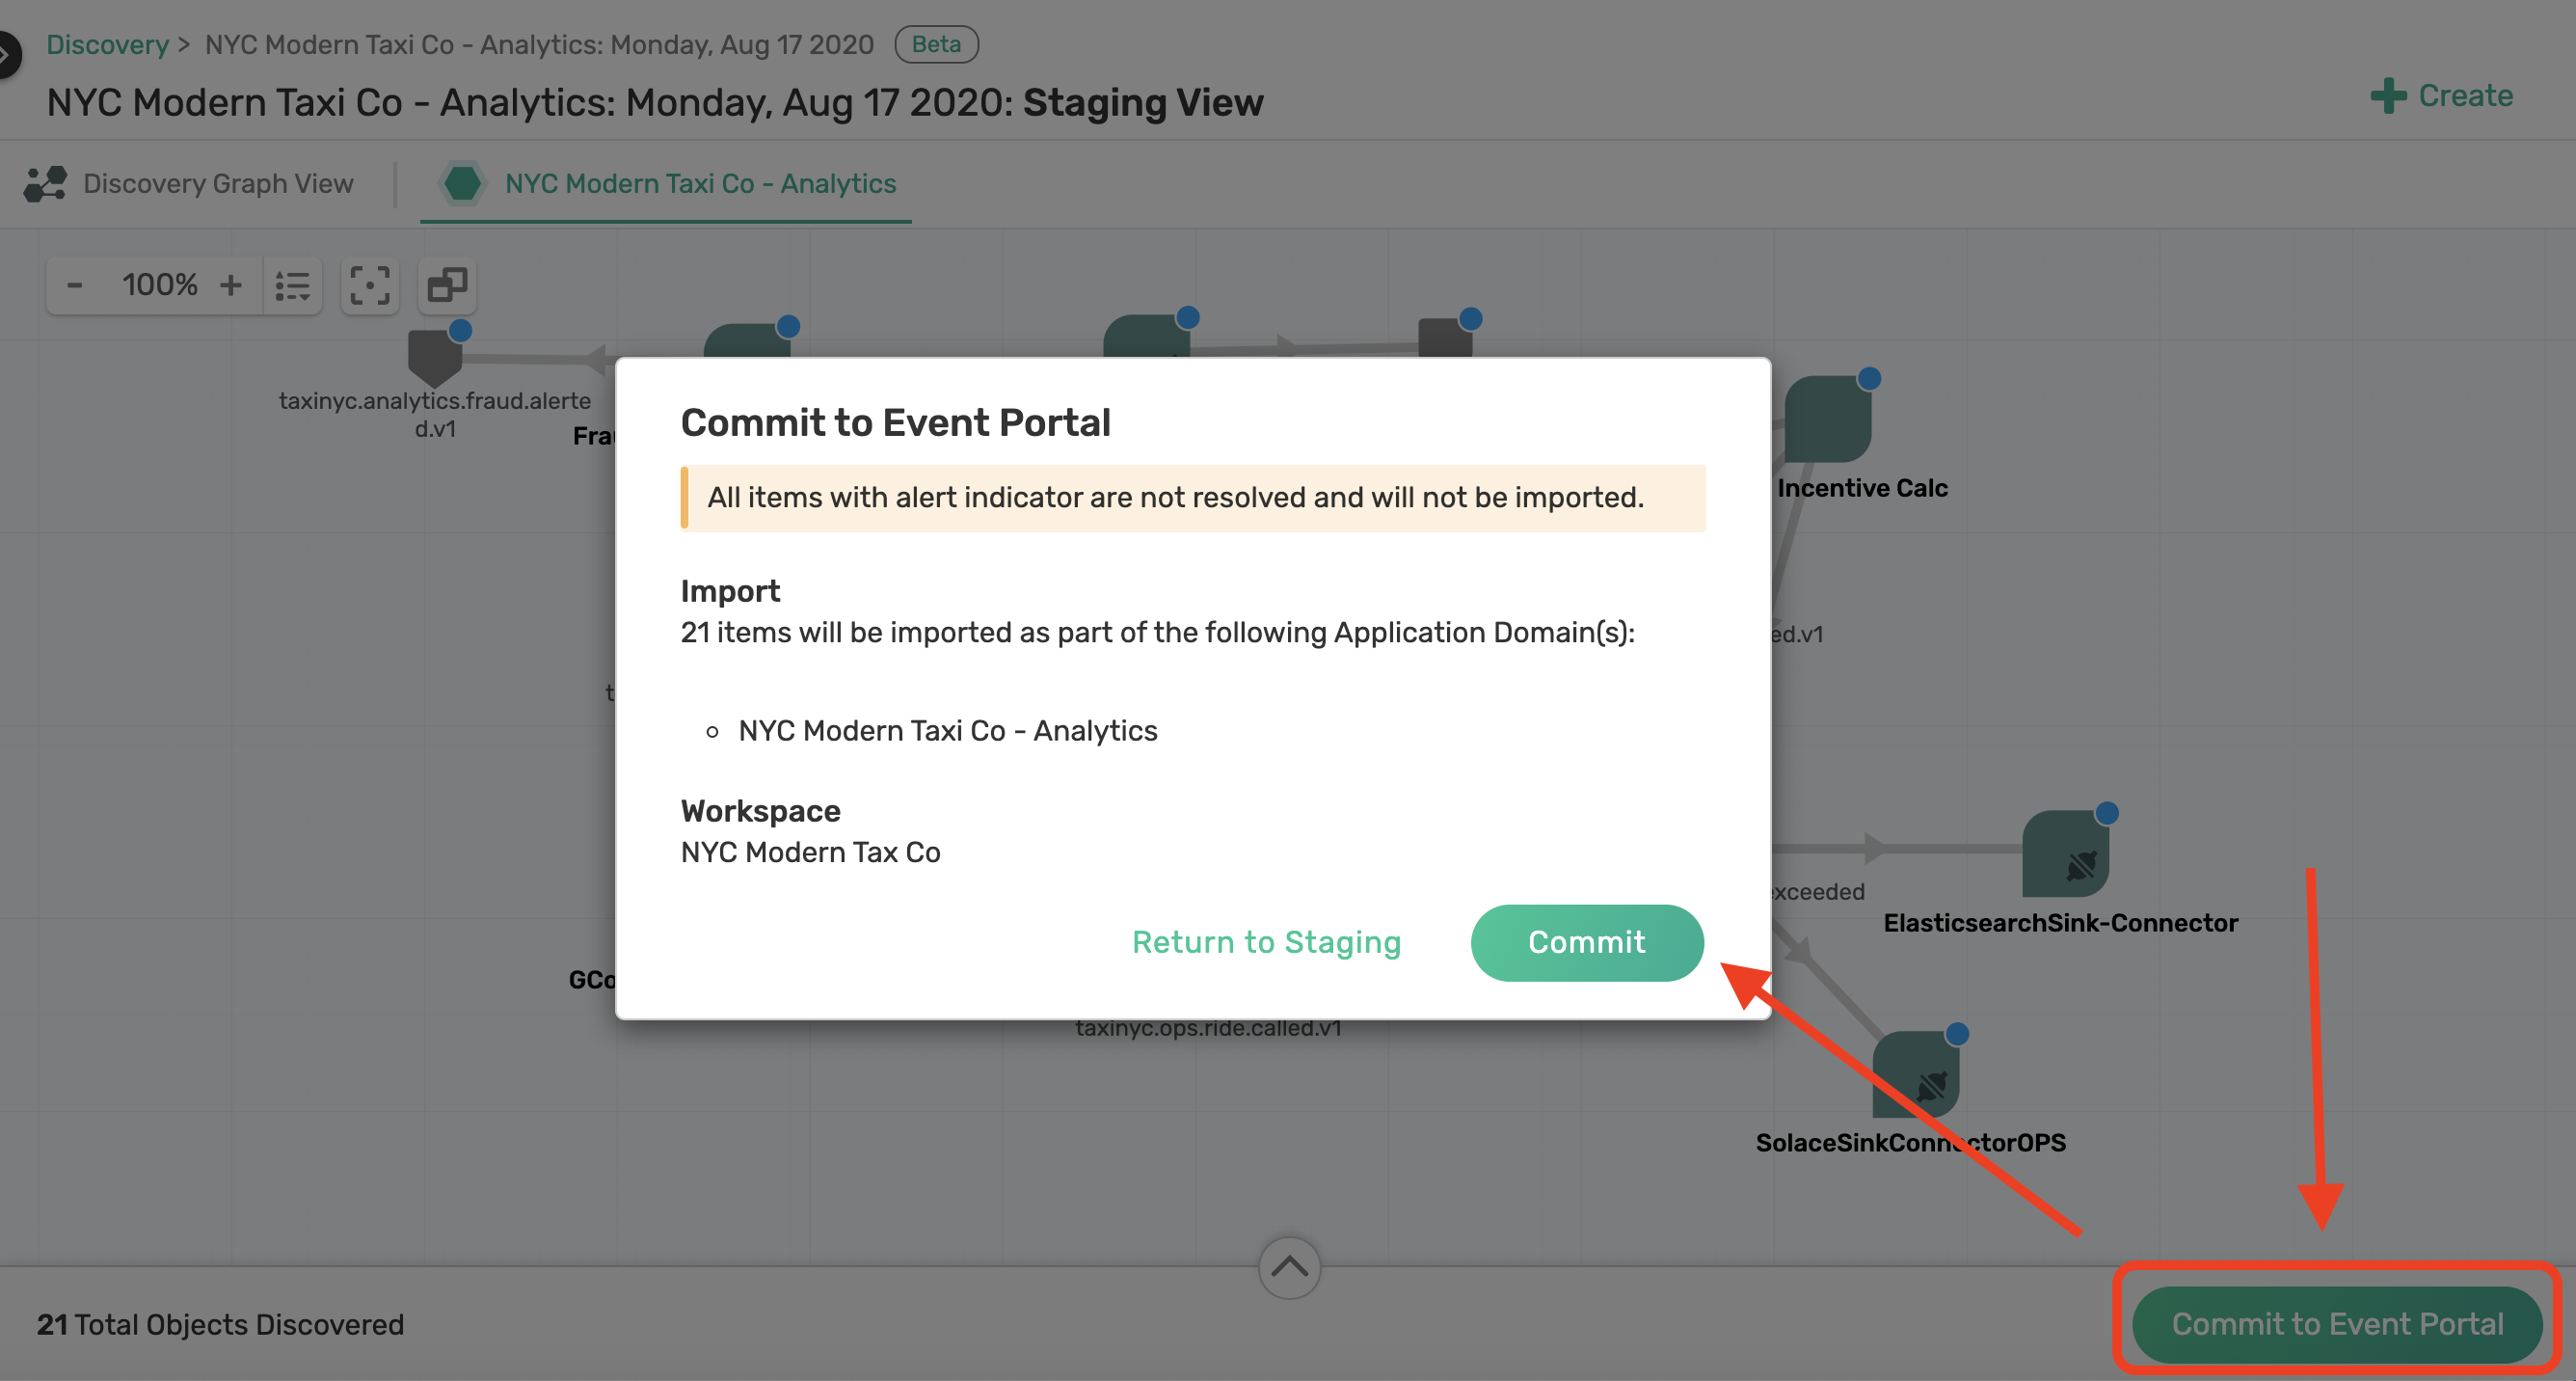 Commit to Event Portal